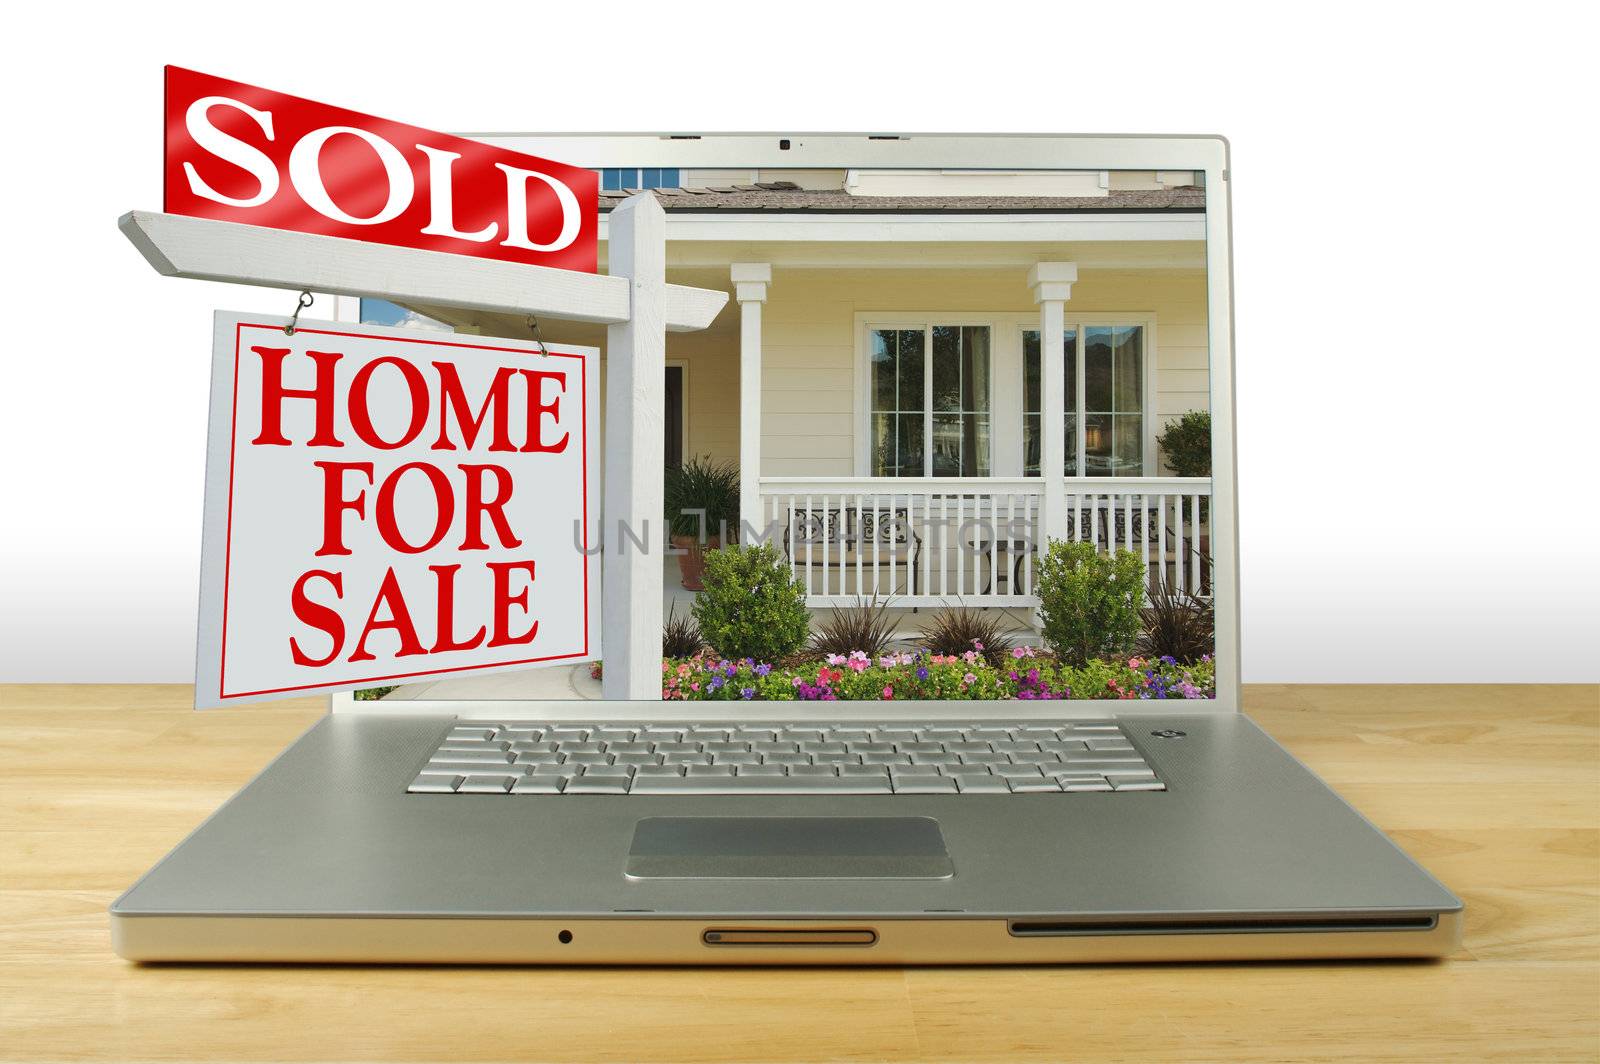 Sold Home For Sale Sign on Laptop by Feverpitched